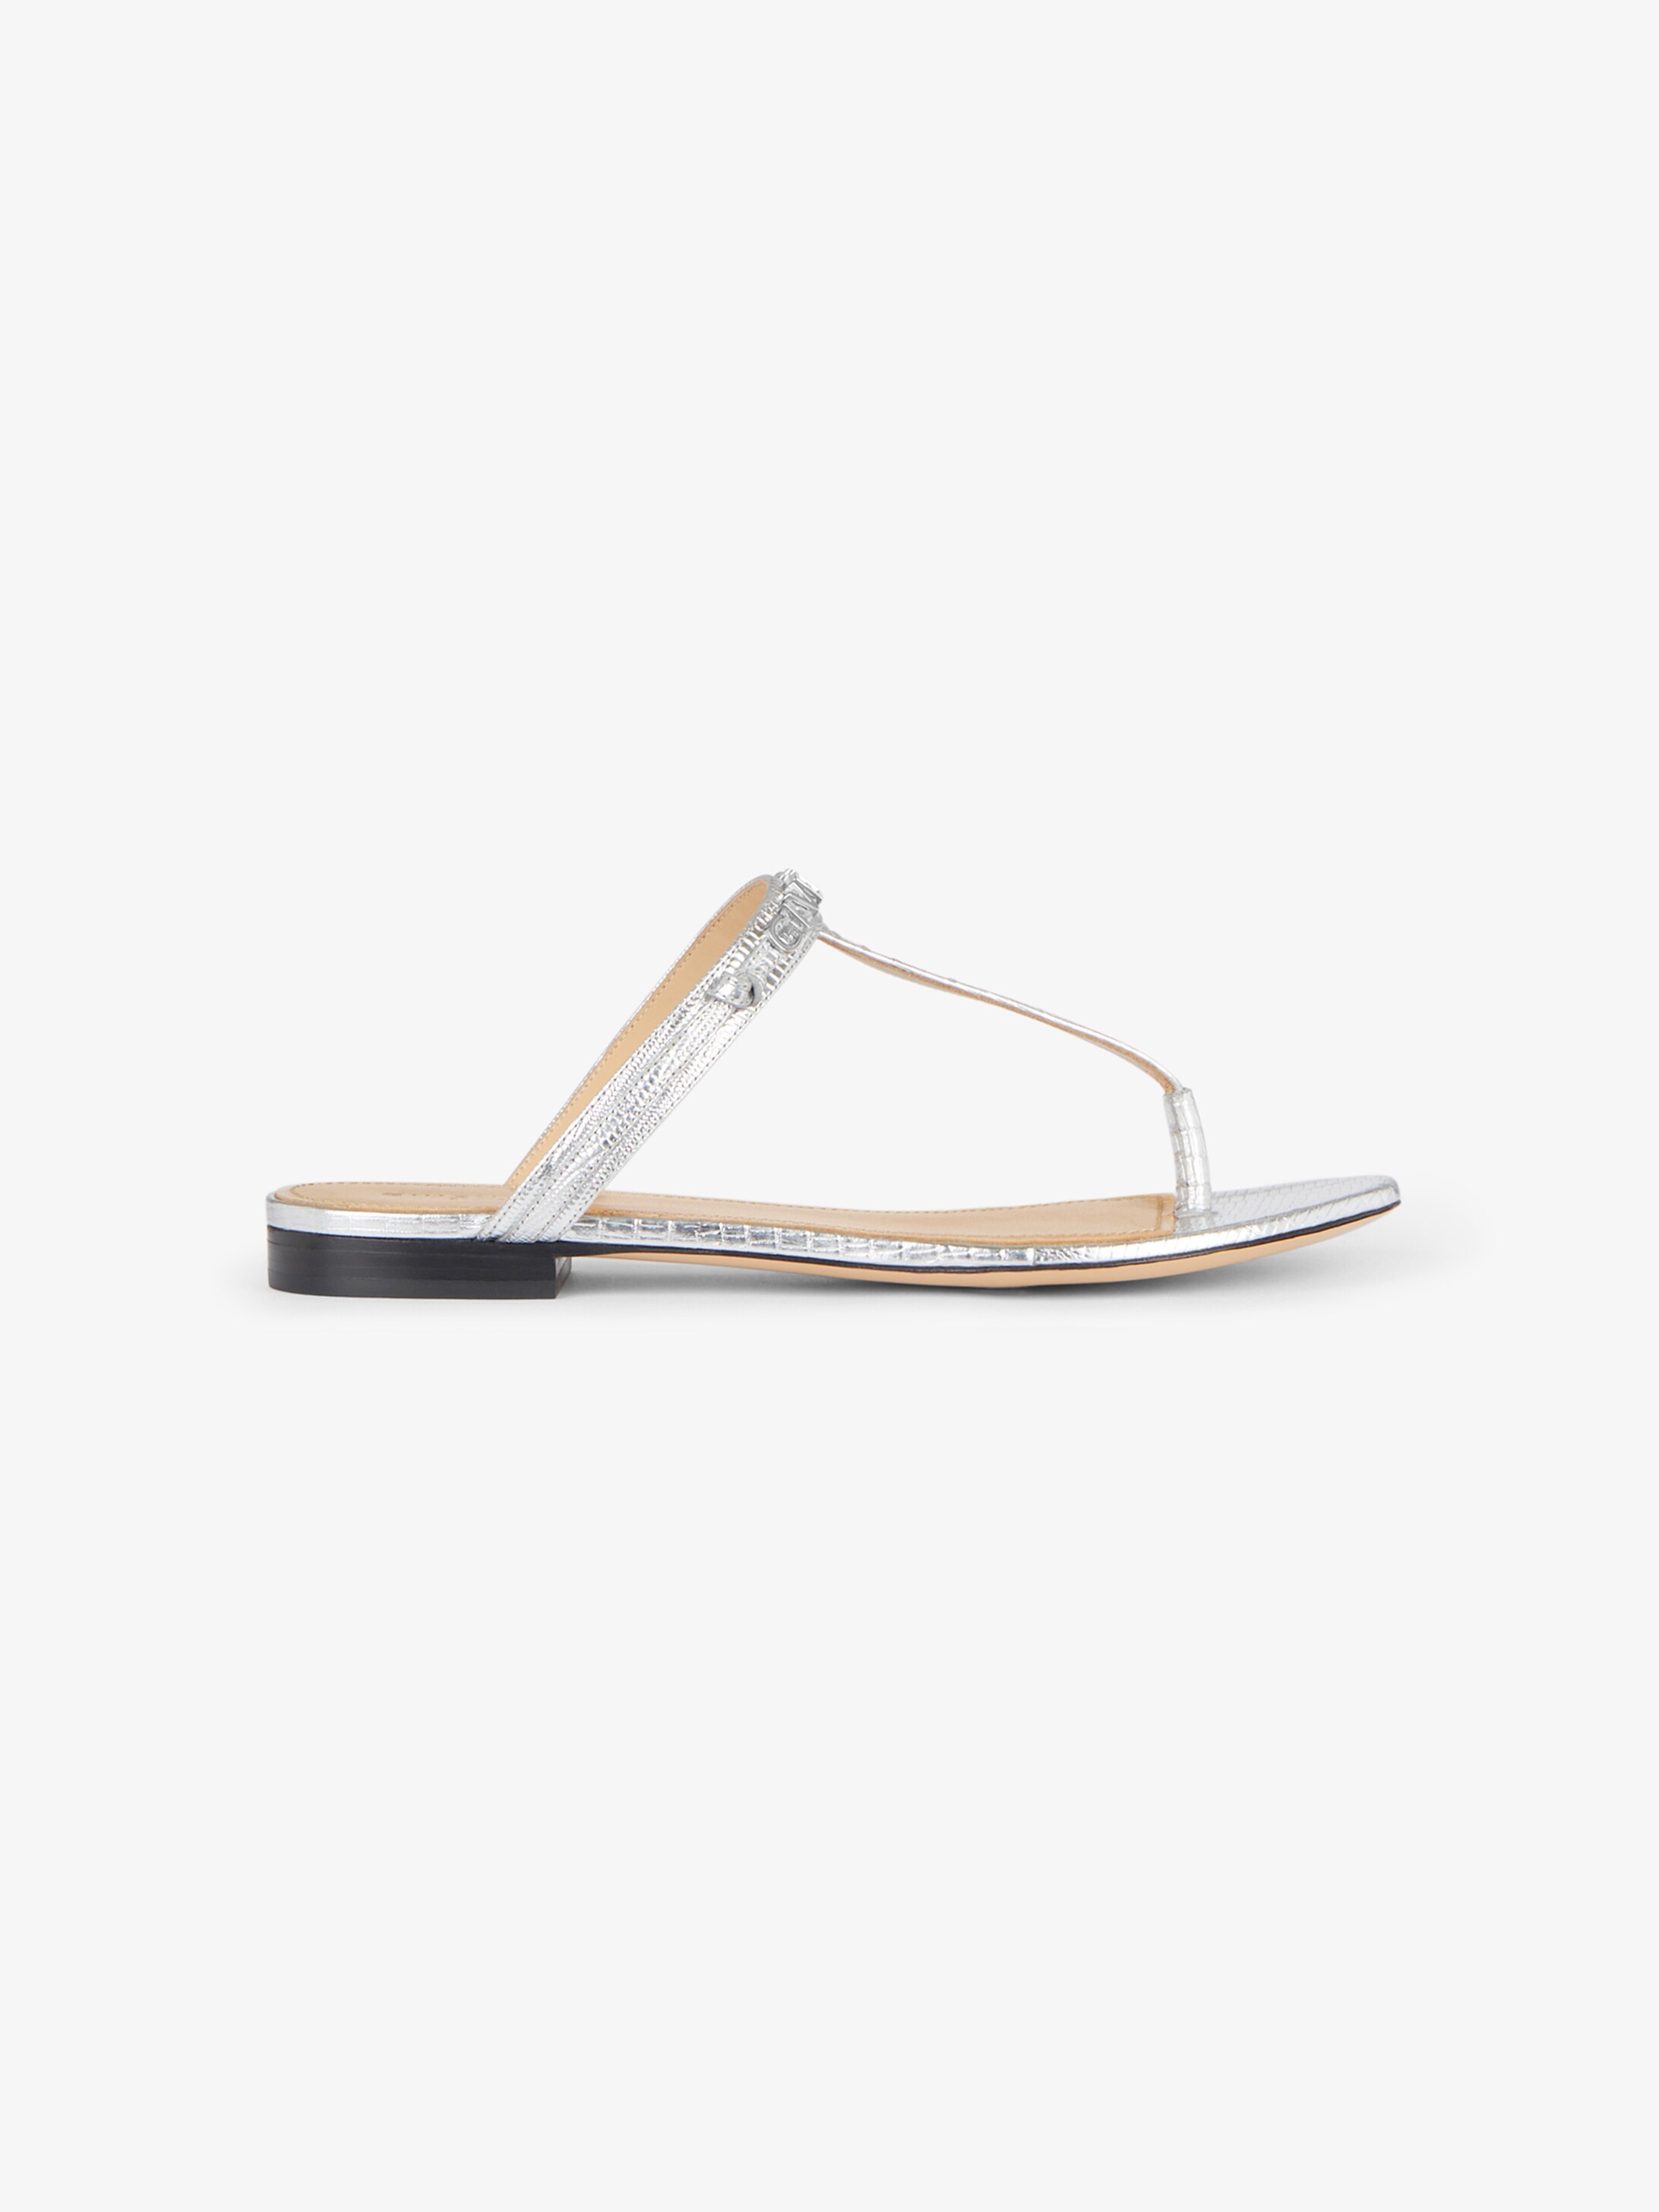 Elba flat thong sandals in lizard effect leather | GIVENCHY Paris